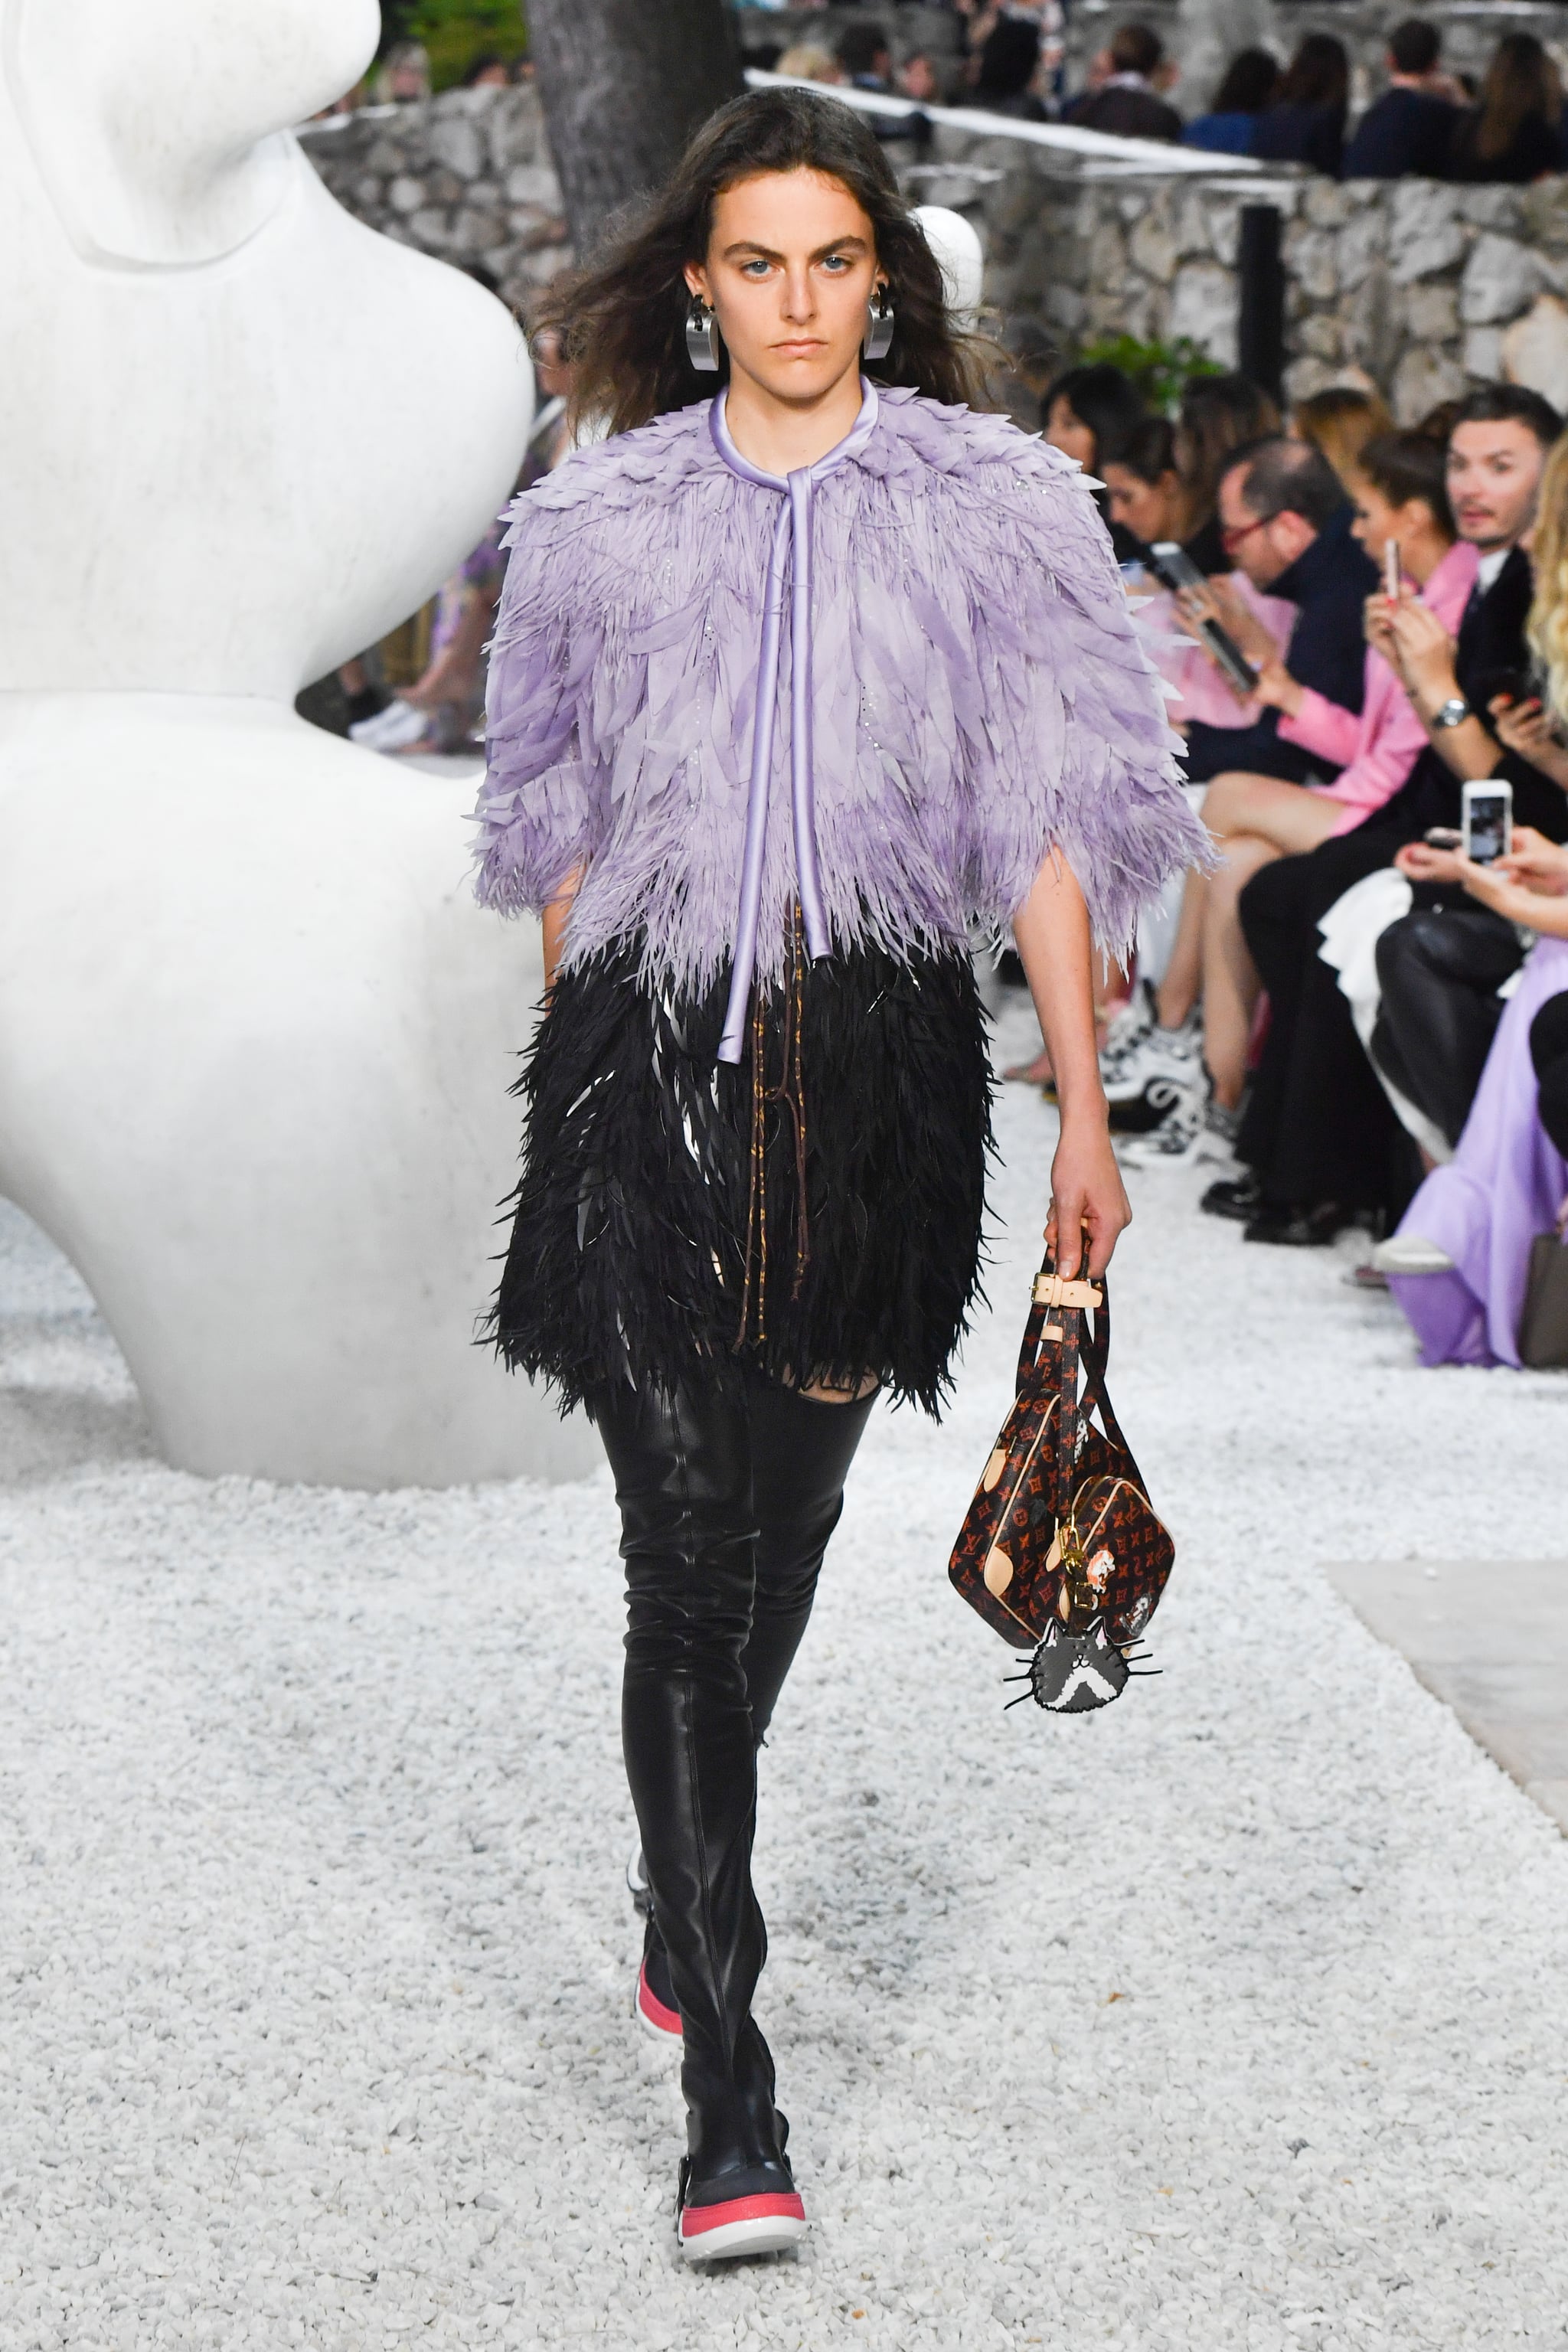 Who What Wear — Feathers, Louis Vuitton & more fantastic street